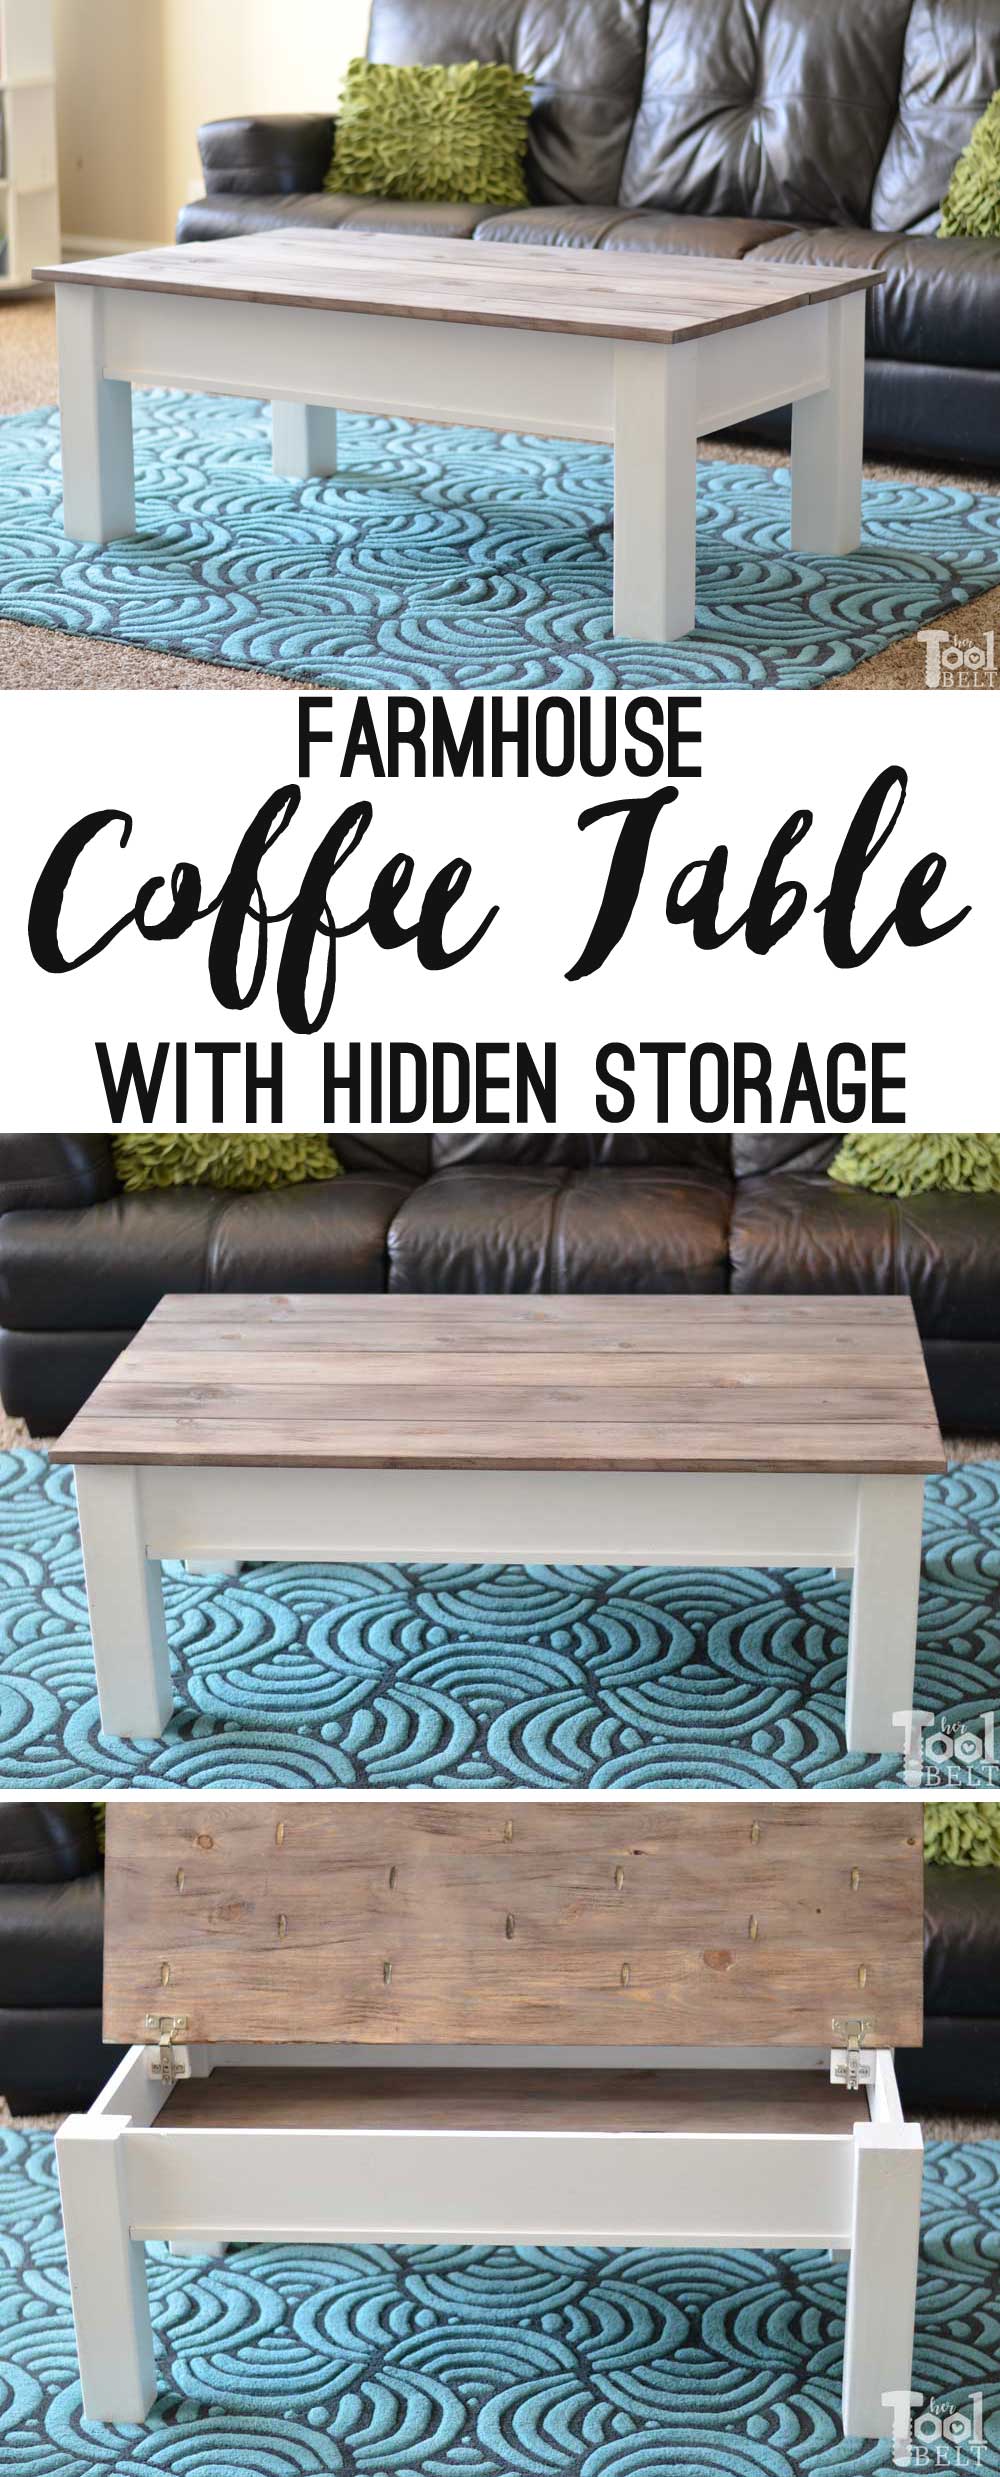 Farmhouse Coffee Table with Hidden Storage - Her Tool Belt